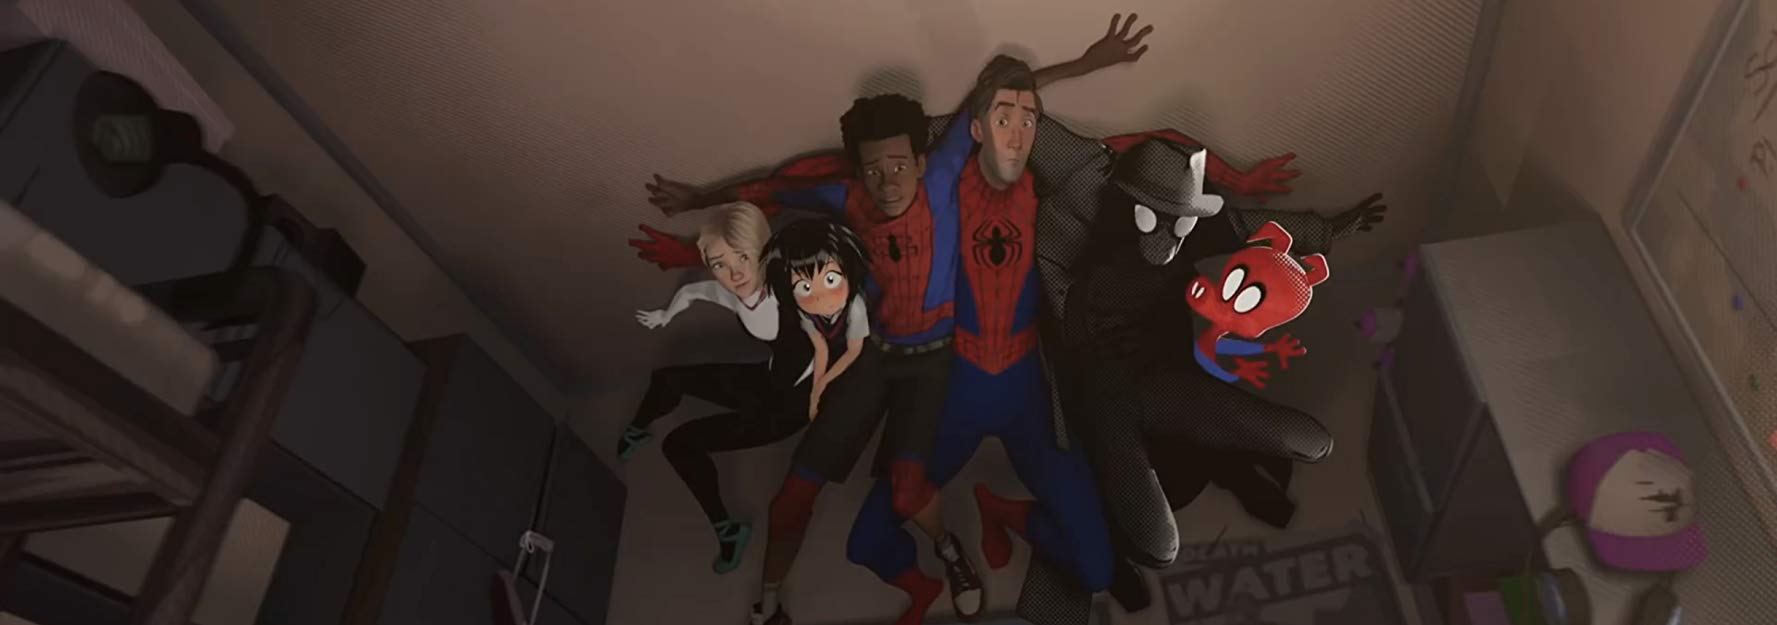 Spider-Man: Into the Spider-Verse (Sony Pictures Releasing)